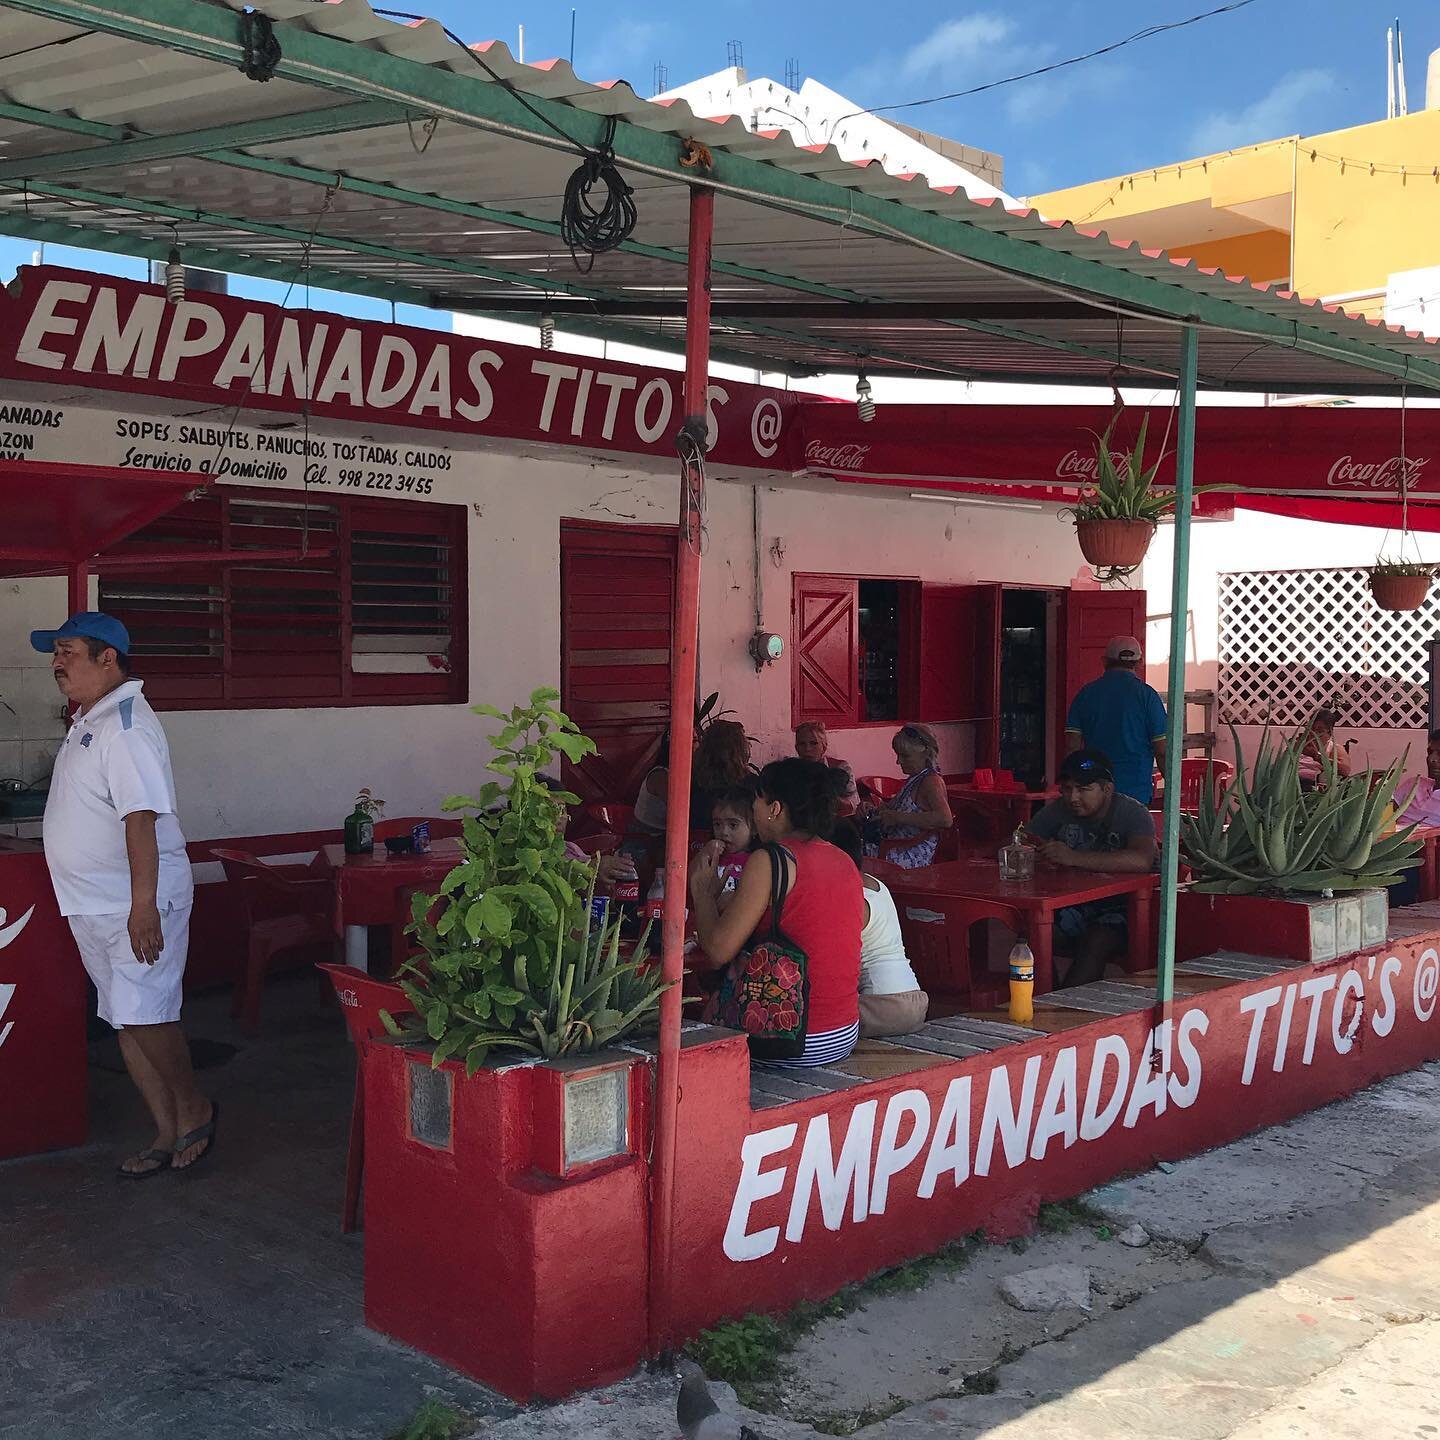 TRAVEL GUIDE: Mexican taquerias and loncherias. How do you know what is authentic? How do you avoid the ones laid out to trap unwitting Norteamericanos? Some helpful hints:
1. There is no menu
2. If there is a menu, it is only in Spanish
3. They are 